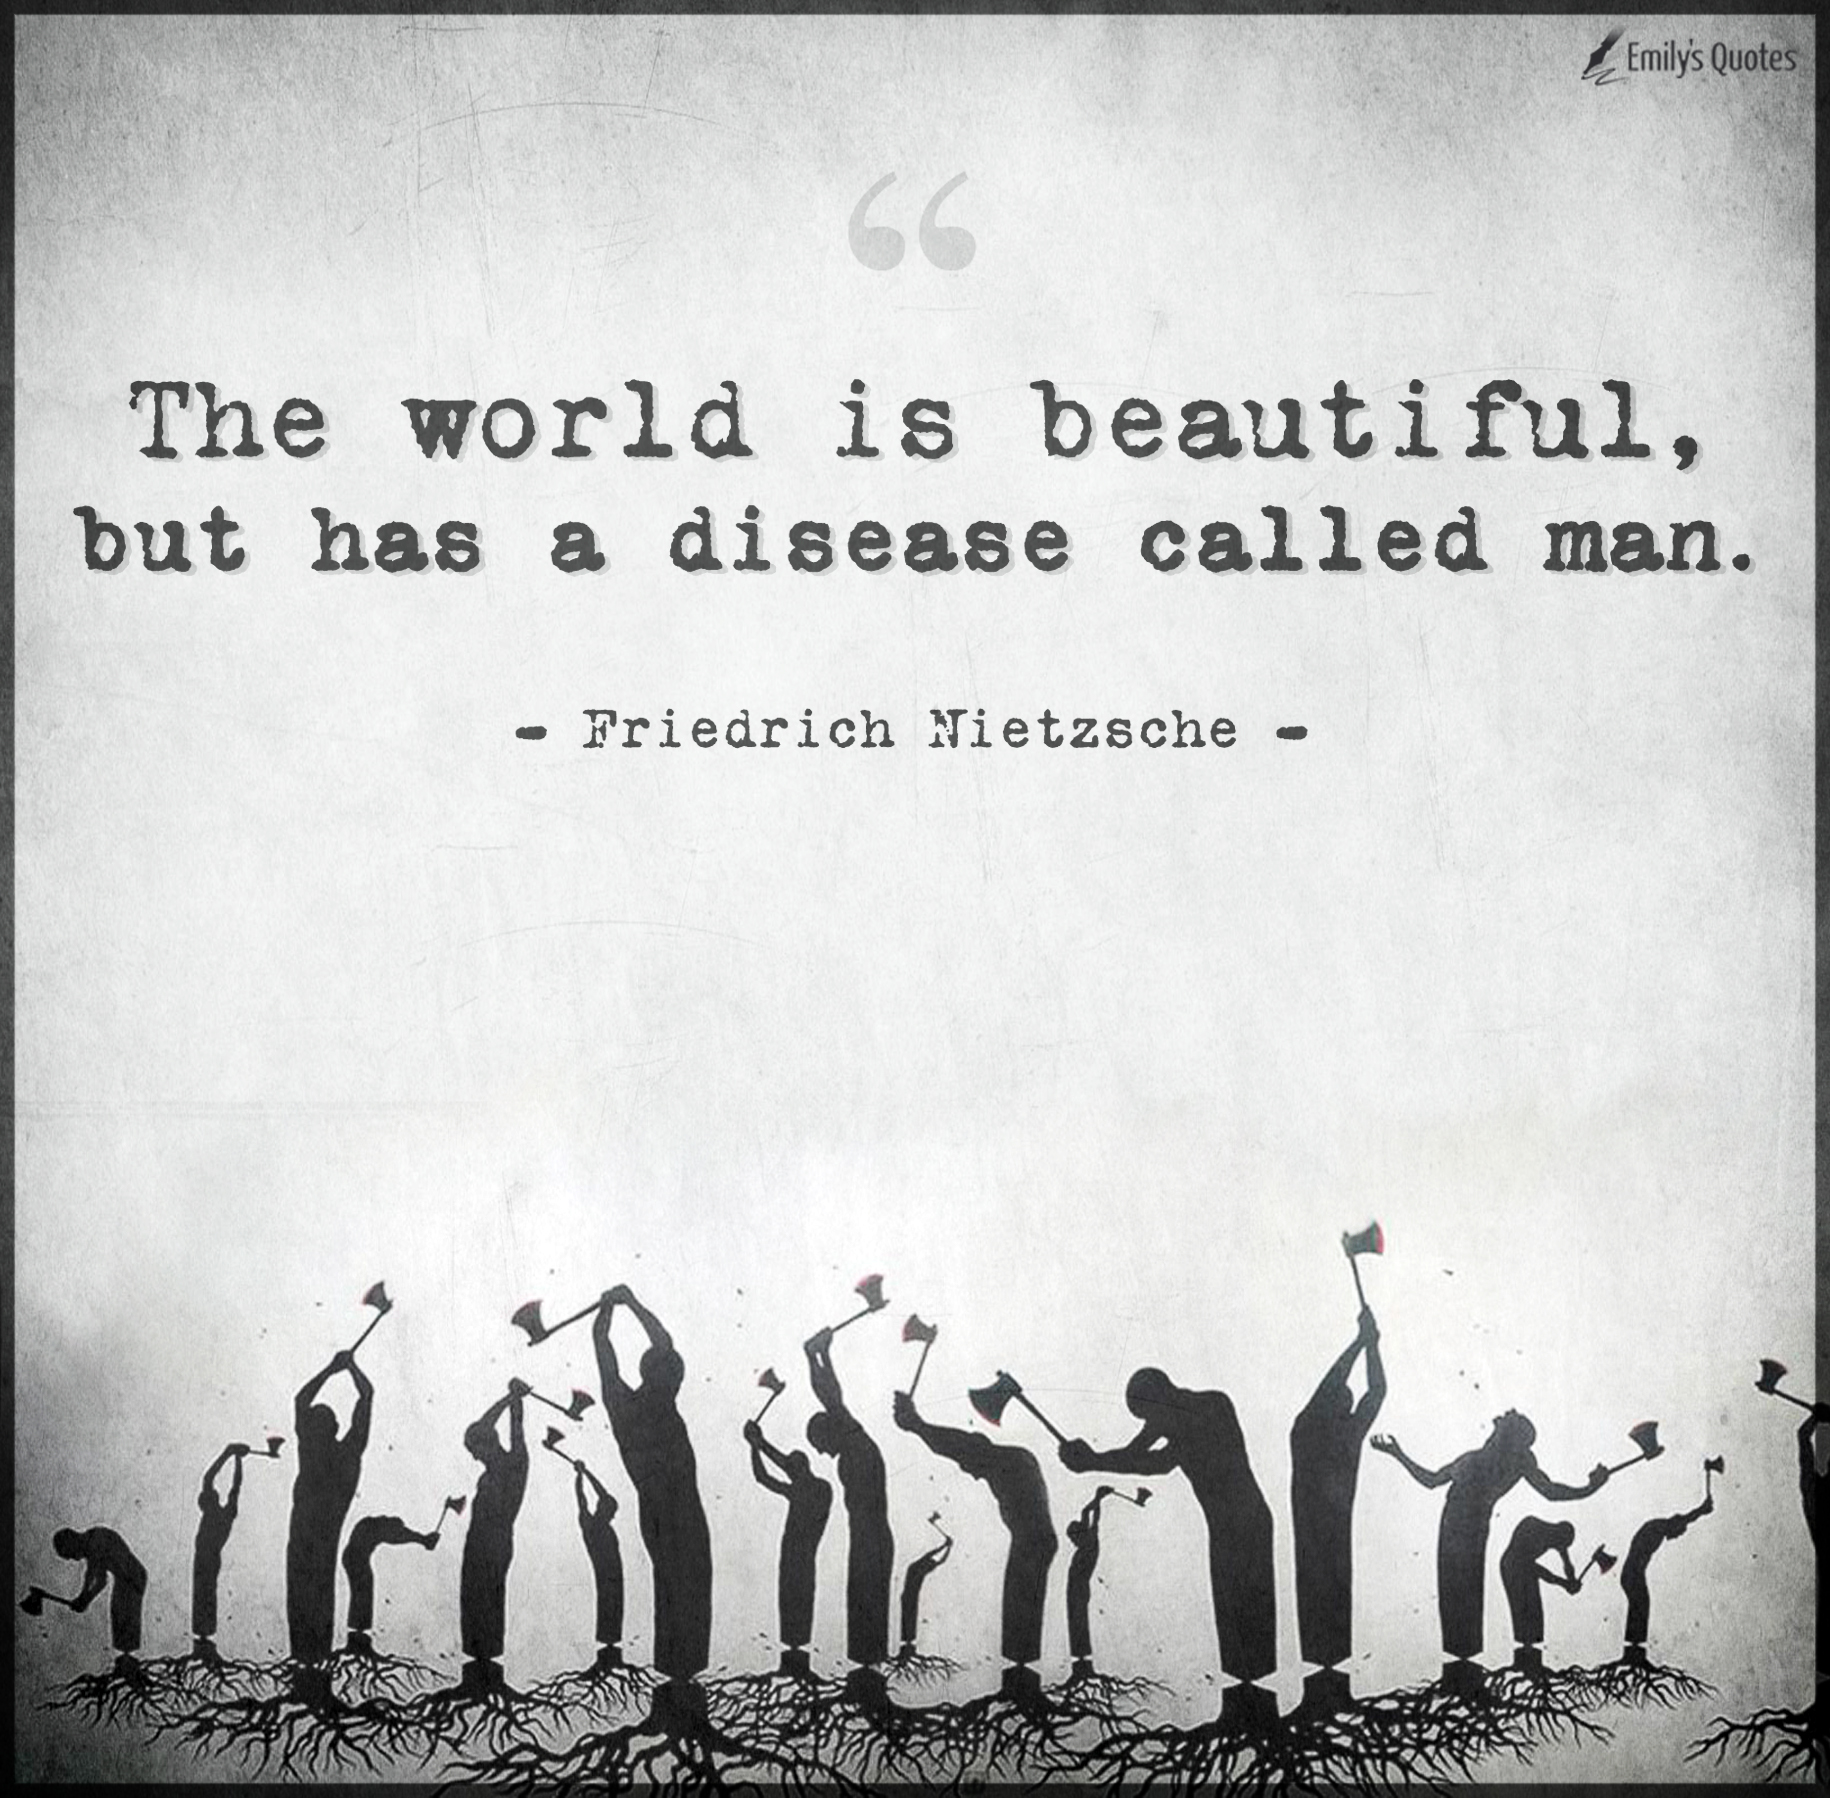 The world is beautiful, but has a disease called man